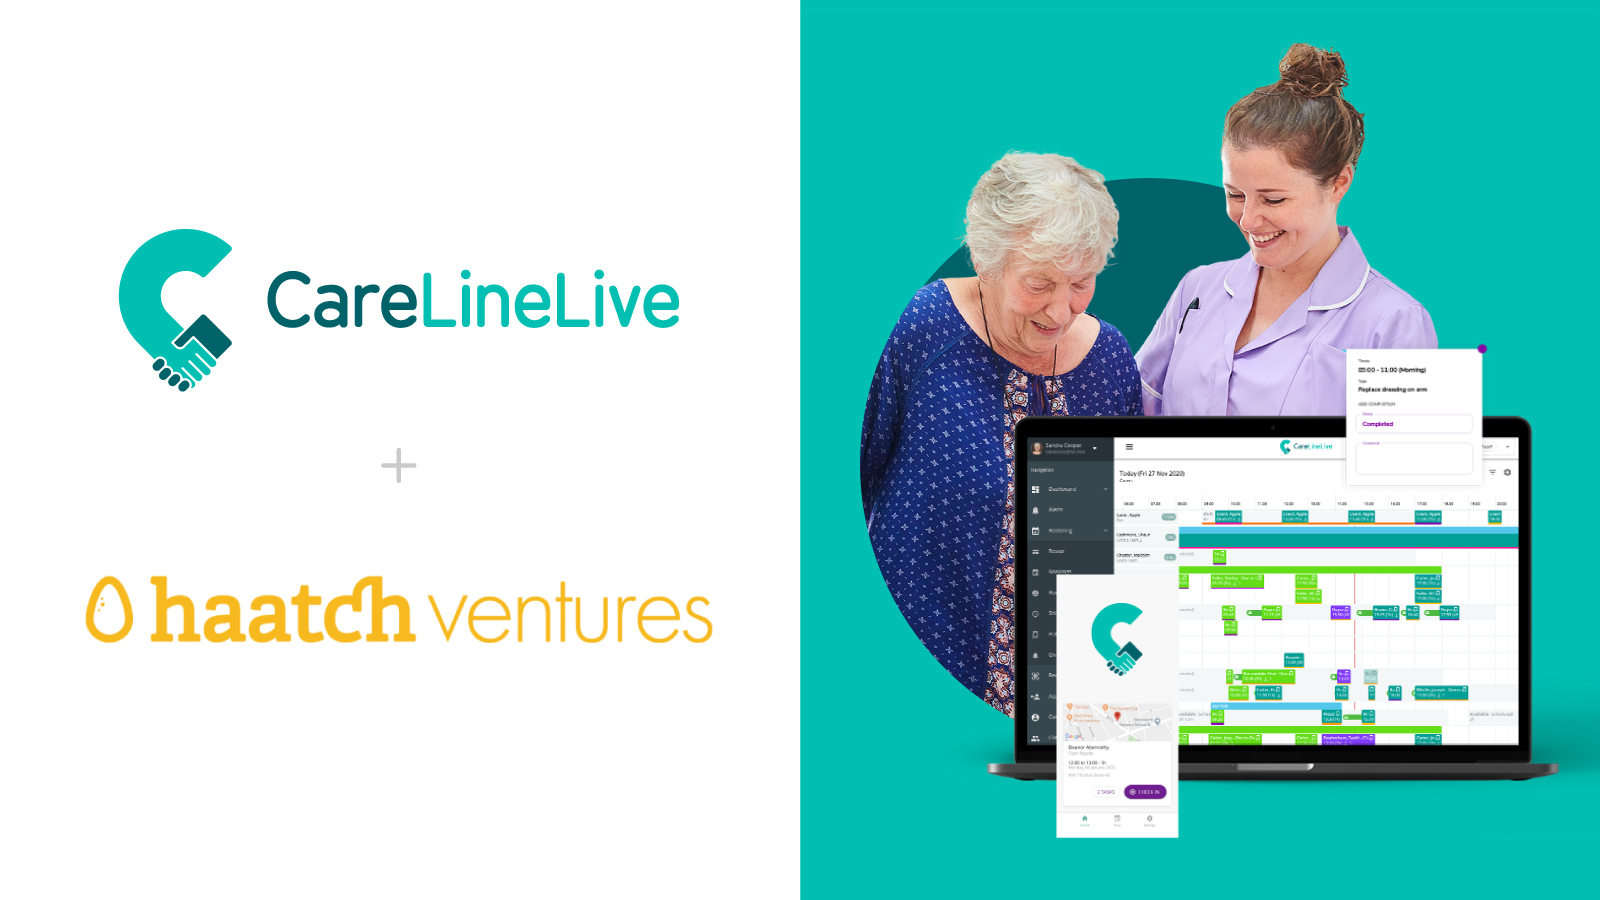 Article about CareLineLive secures £1.2 million funding to support digitalisation and innovation within the homecare sector